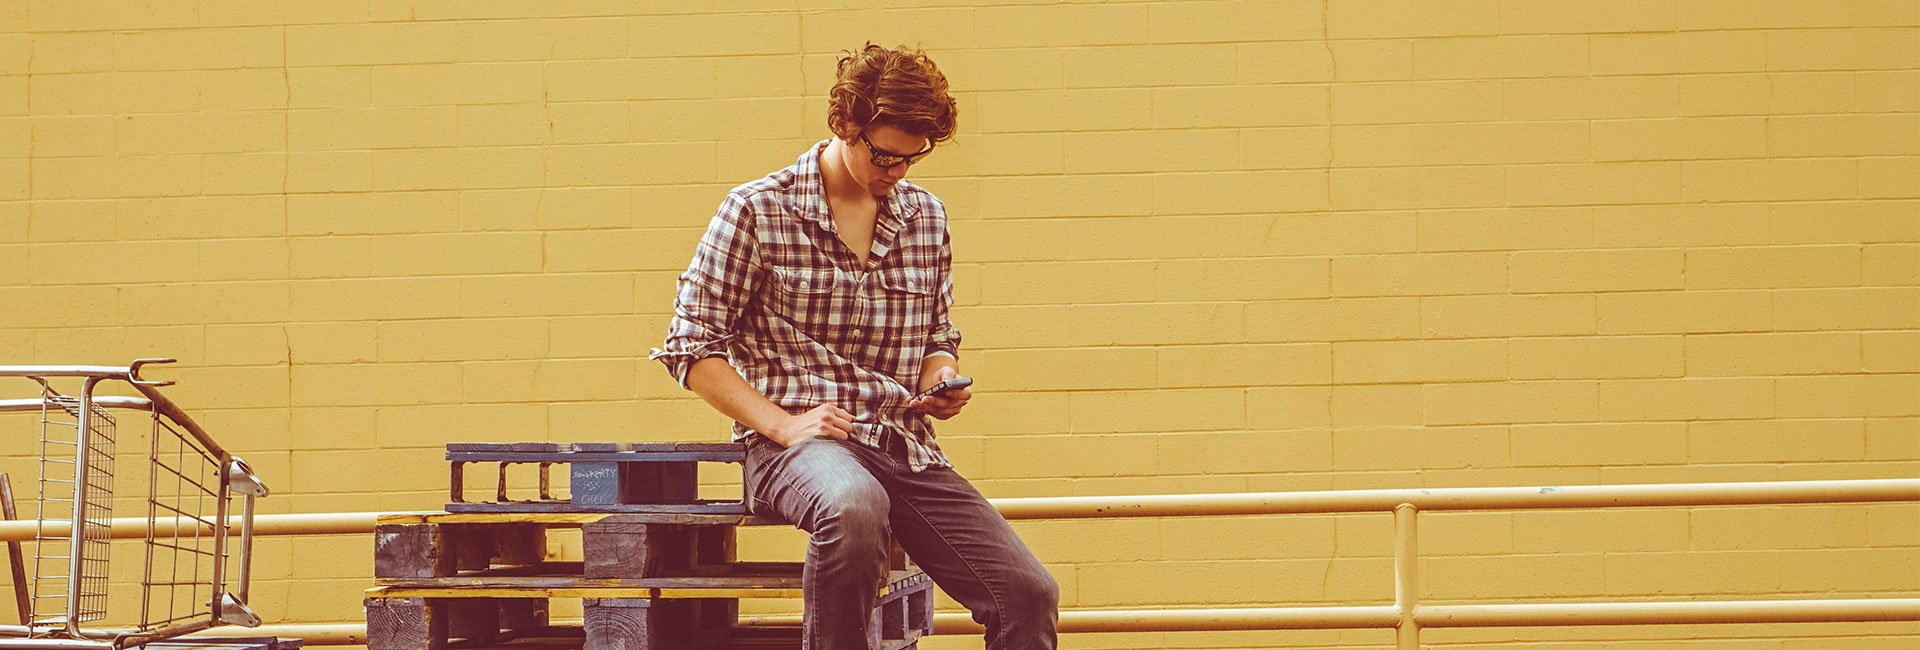 person-sitting-on-pallets-looking-at-phone